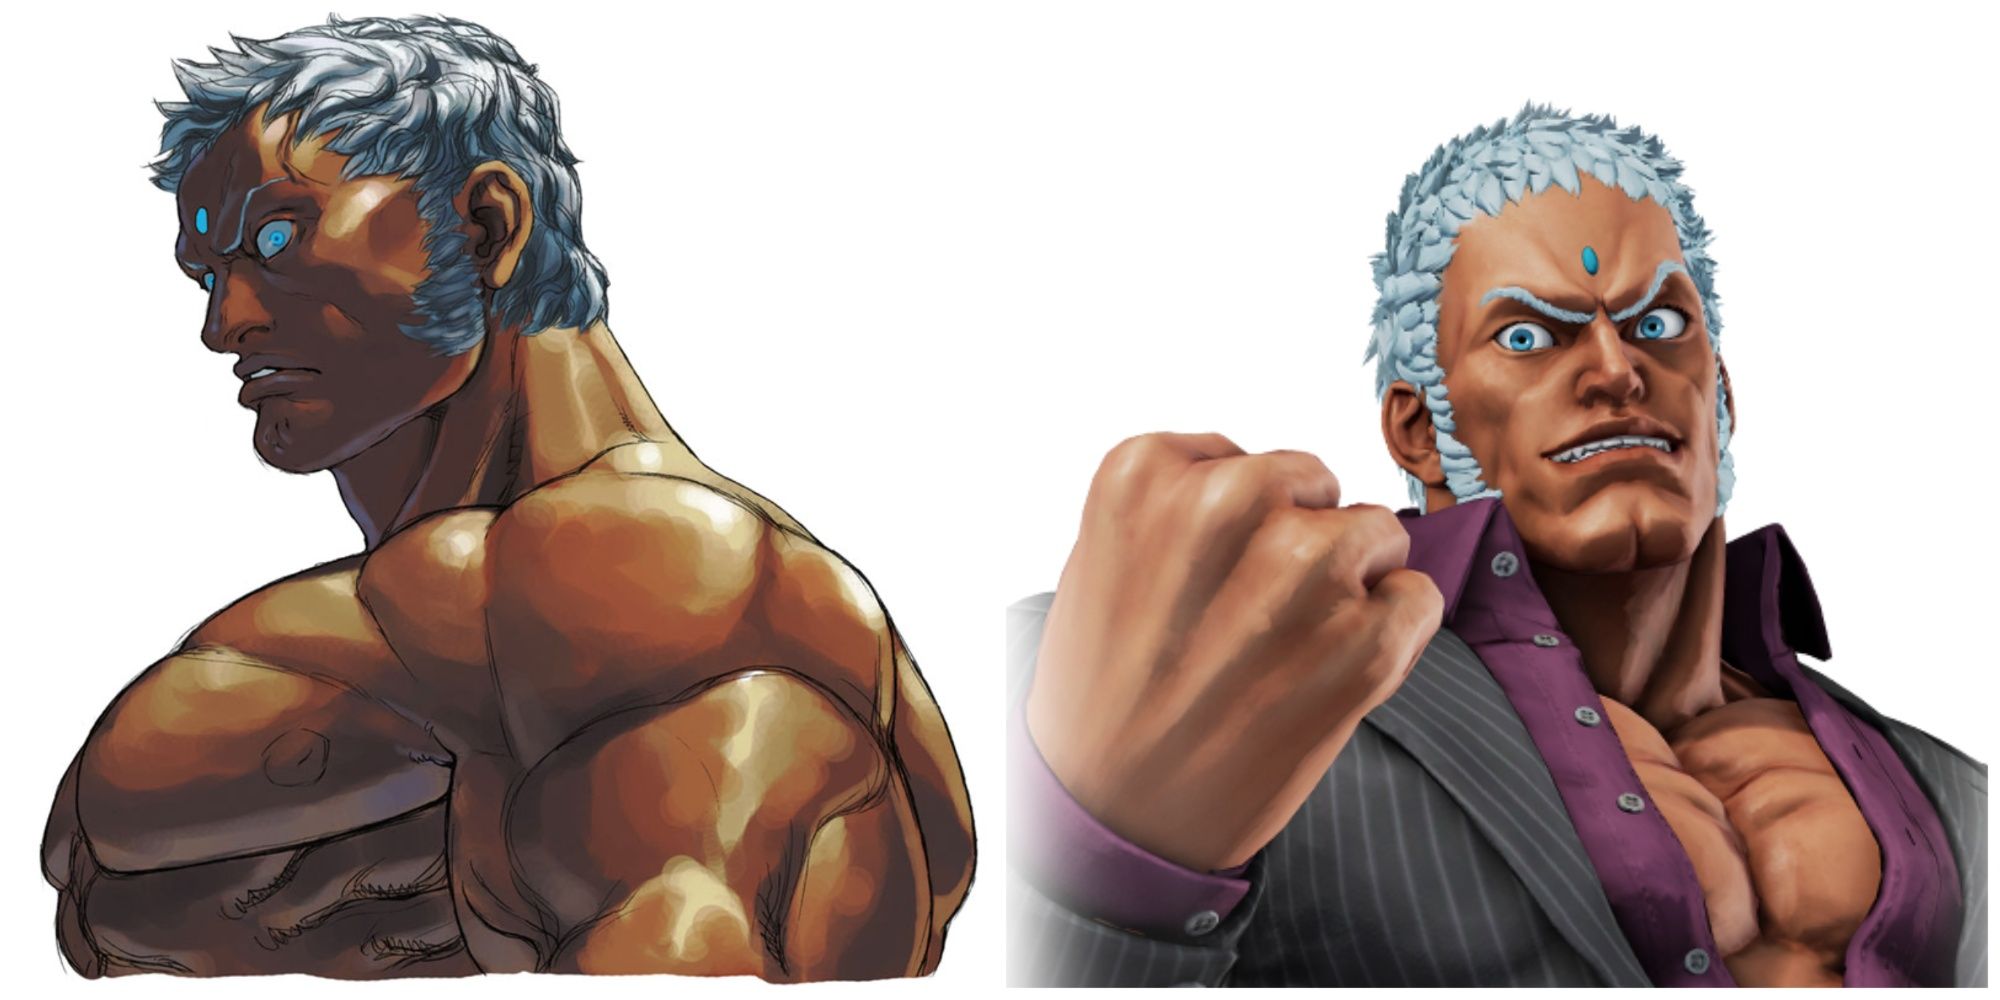 Urien naked (in Street Fighter III) and clothed (in Street Fighter V)